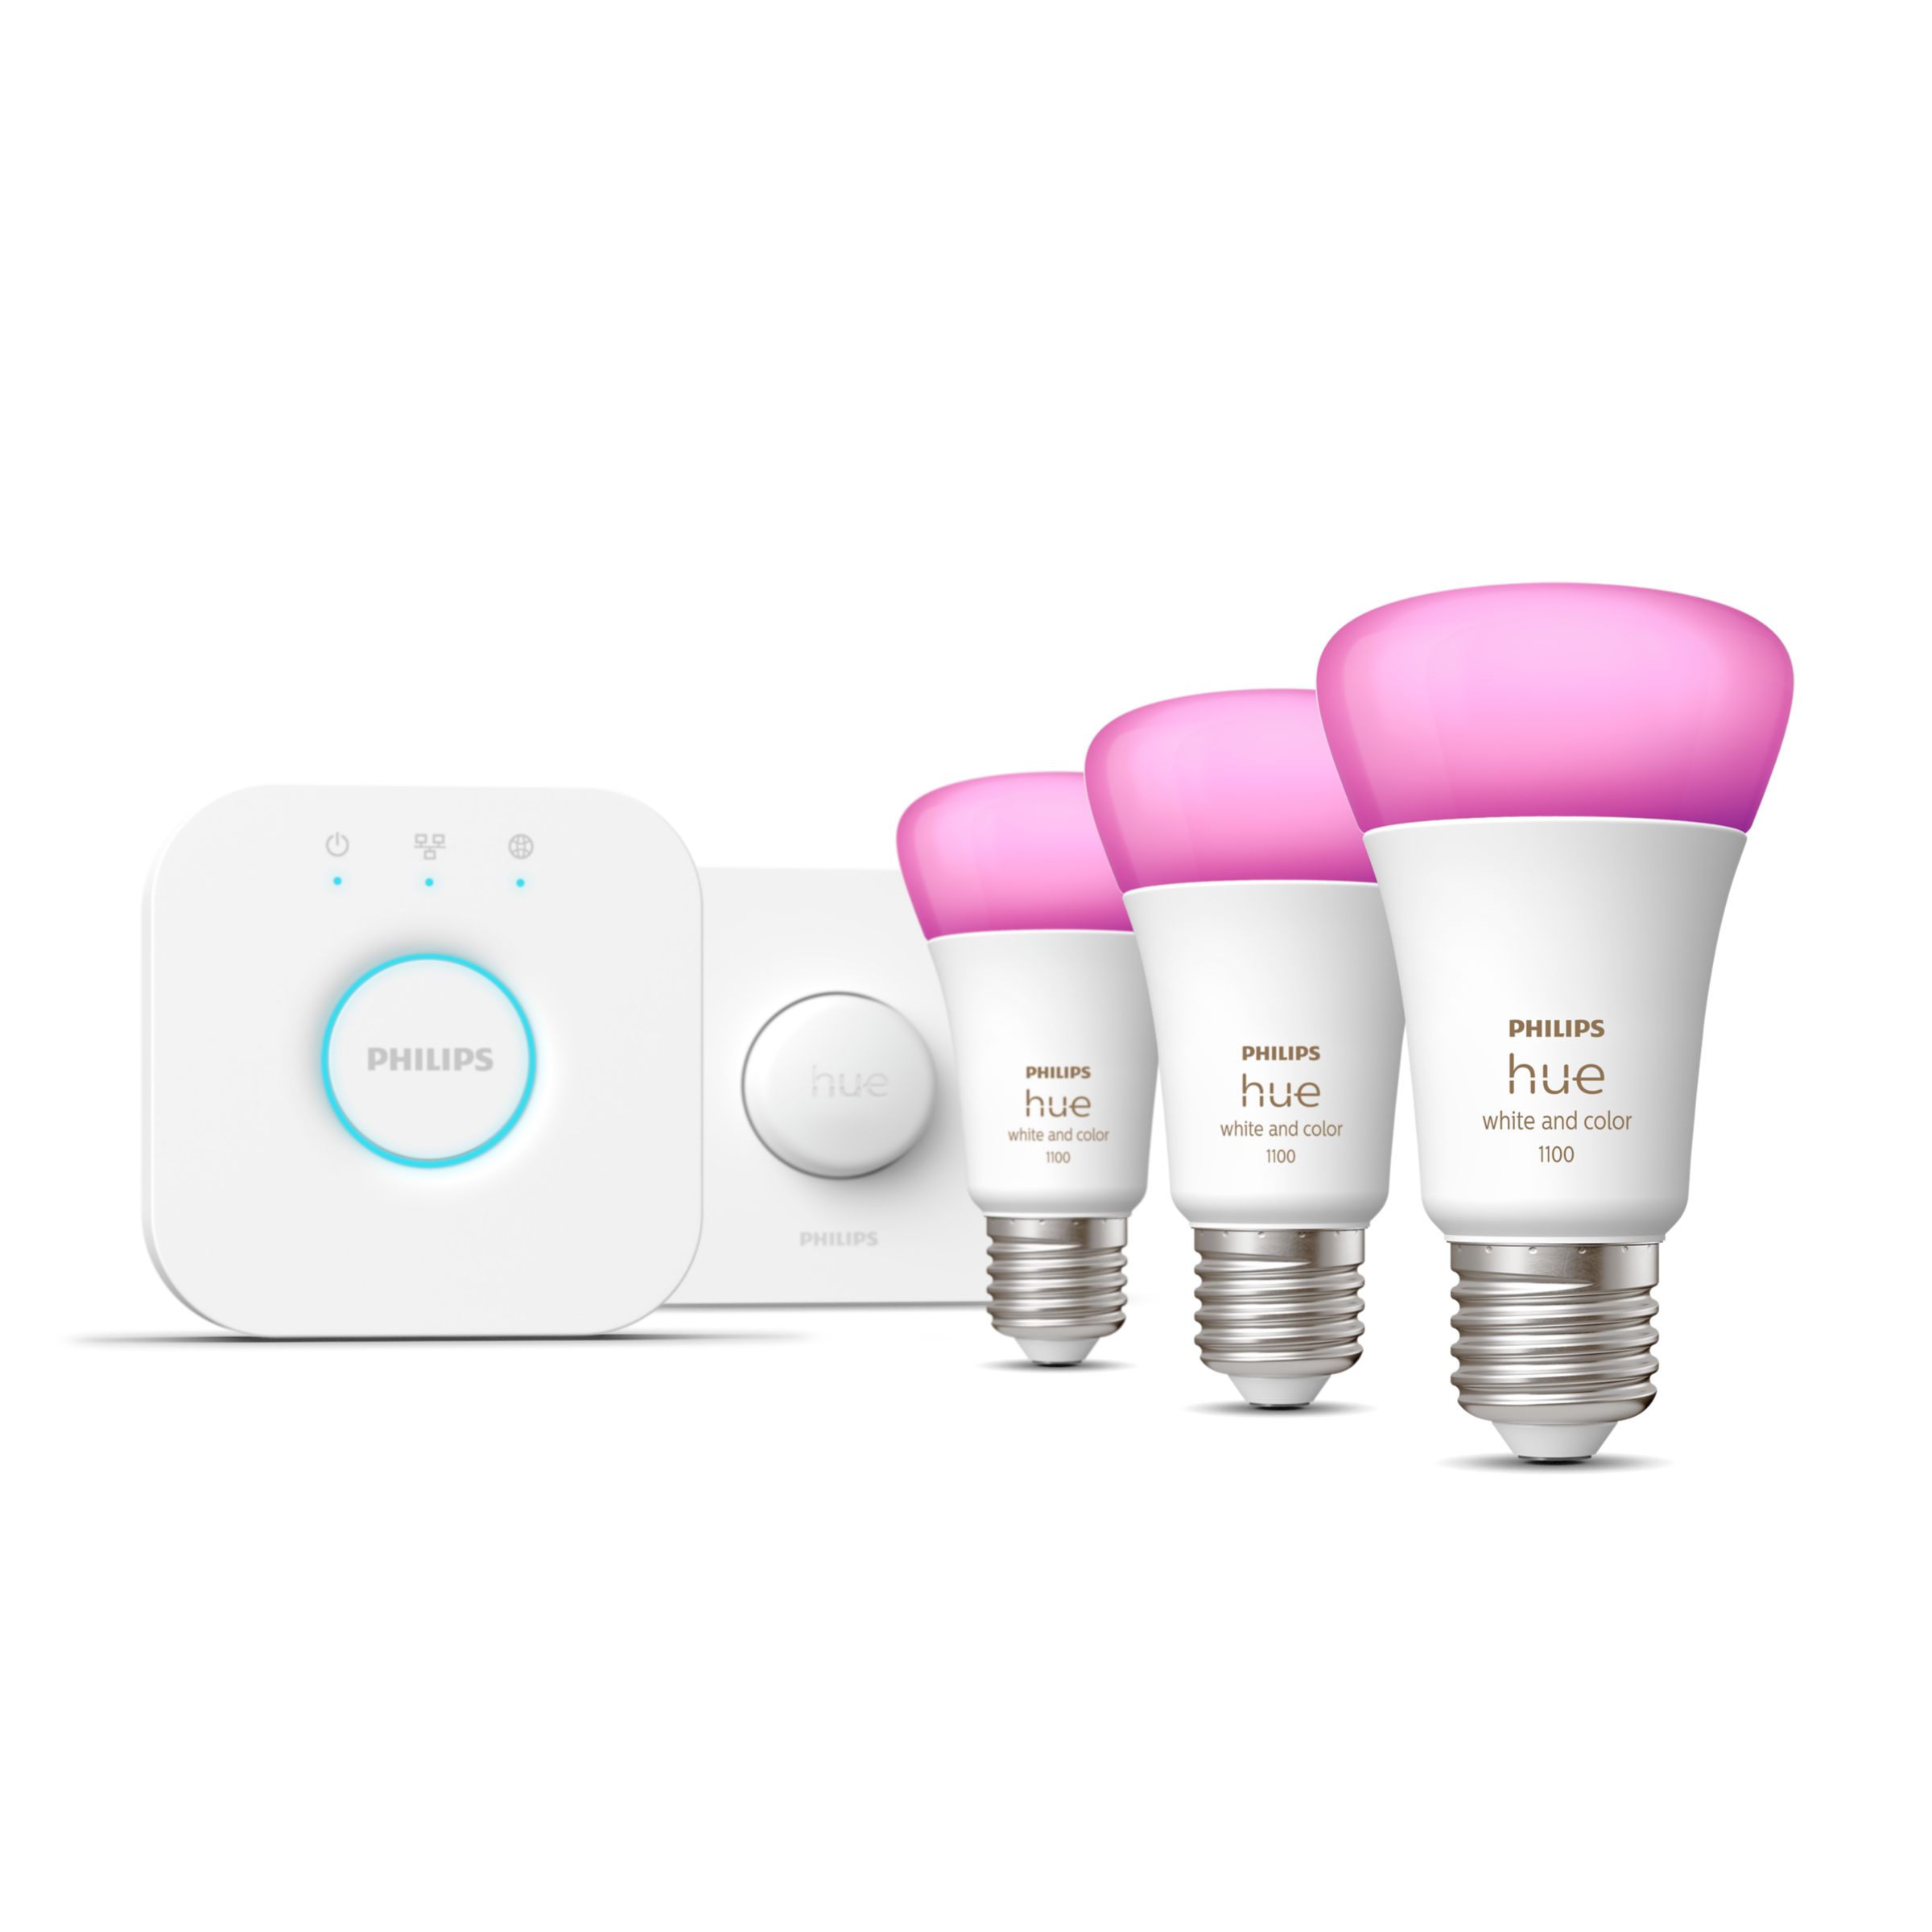 Philips Hue Starter kit E27 - White and color ambiance